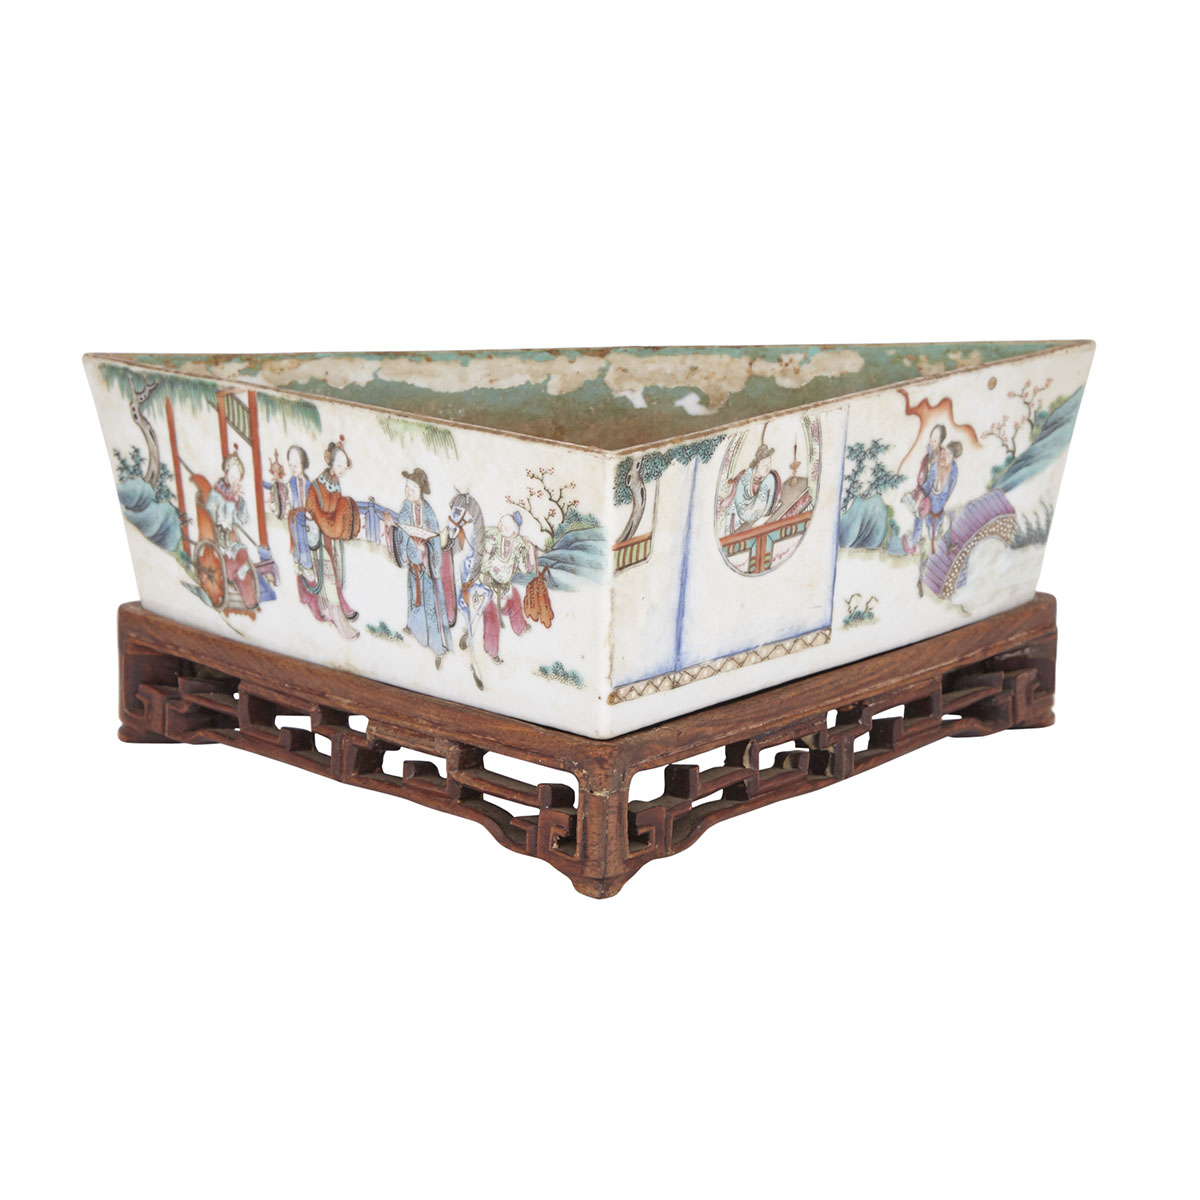 A Triangular Famille Rose Planter, Republic Period or Earlier 